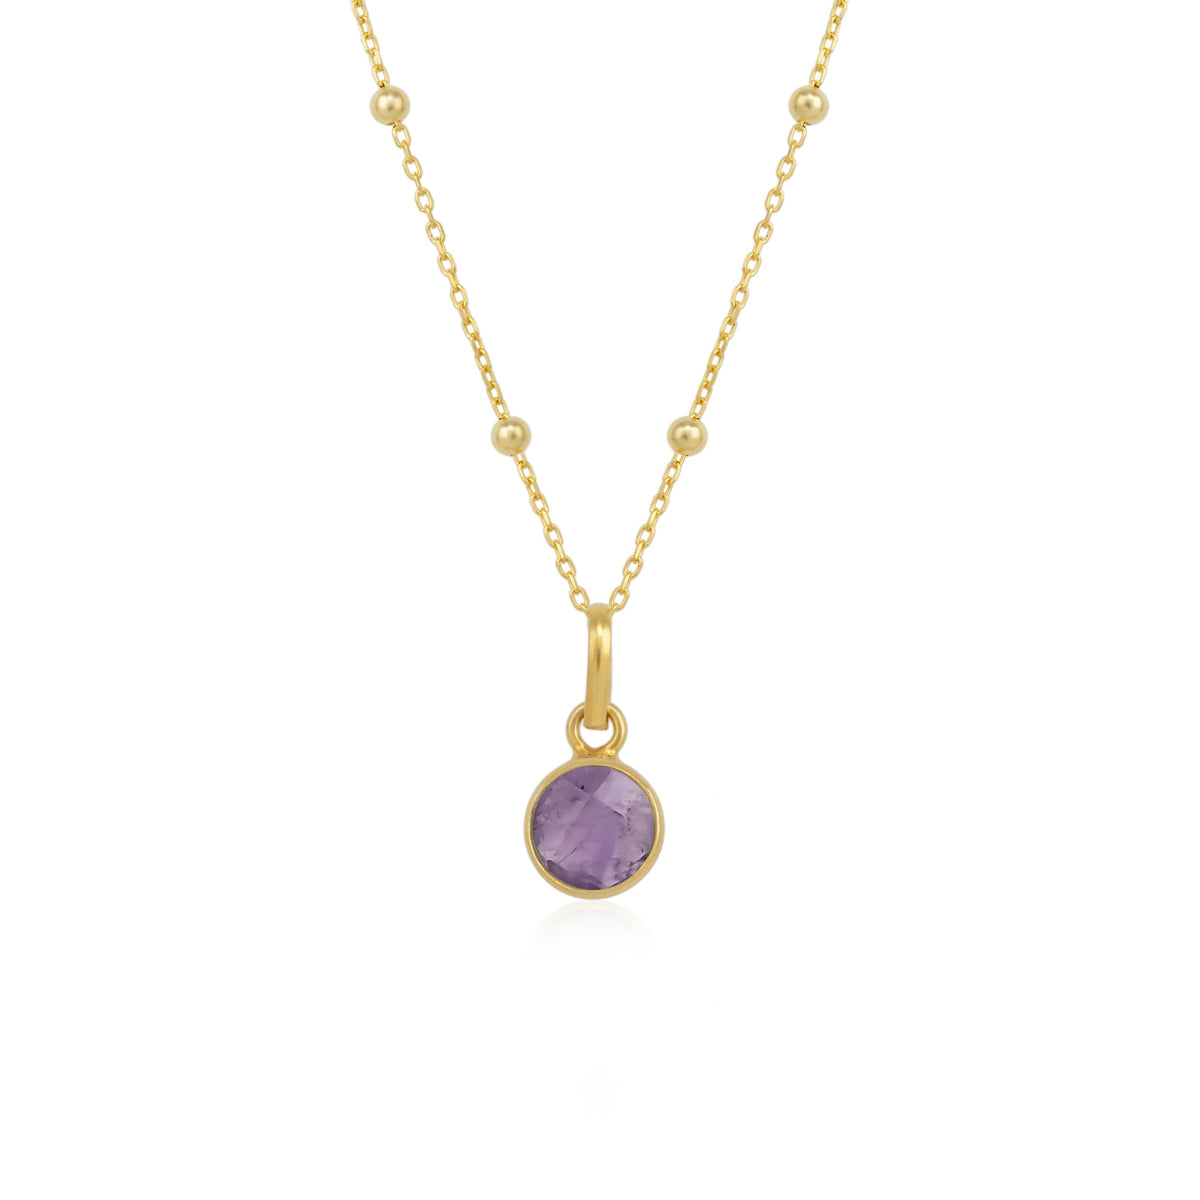 Amethyst Round Pendant Necklace With Beaded Chain in Sterling Silver